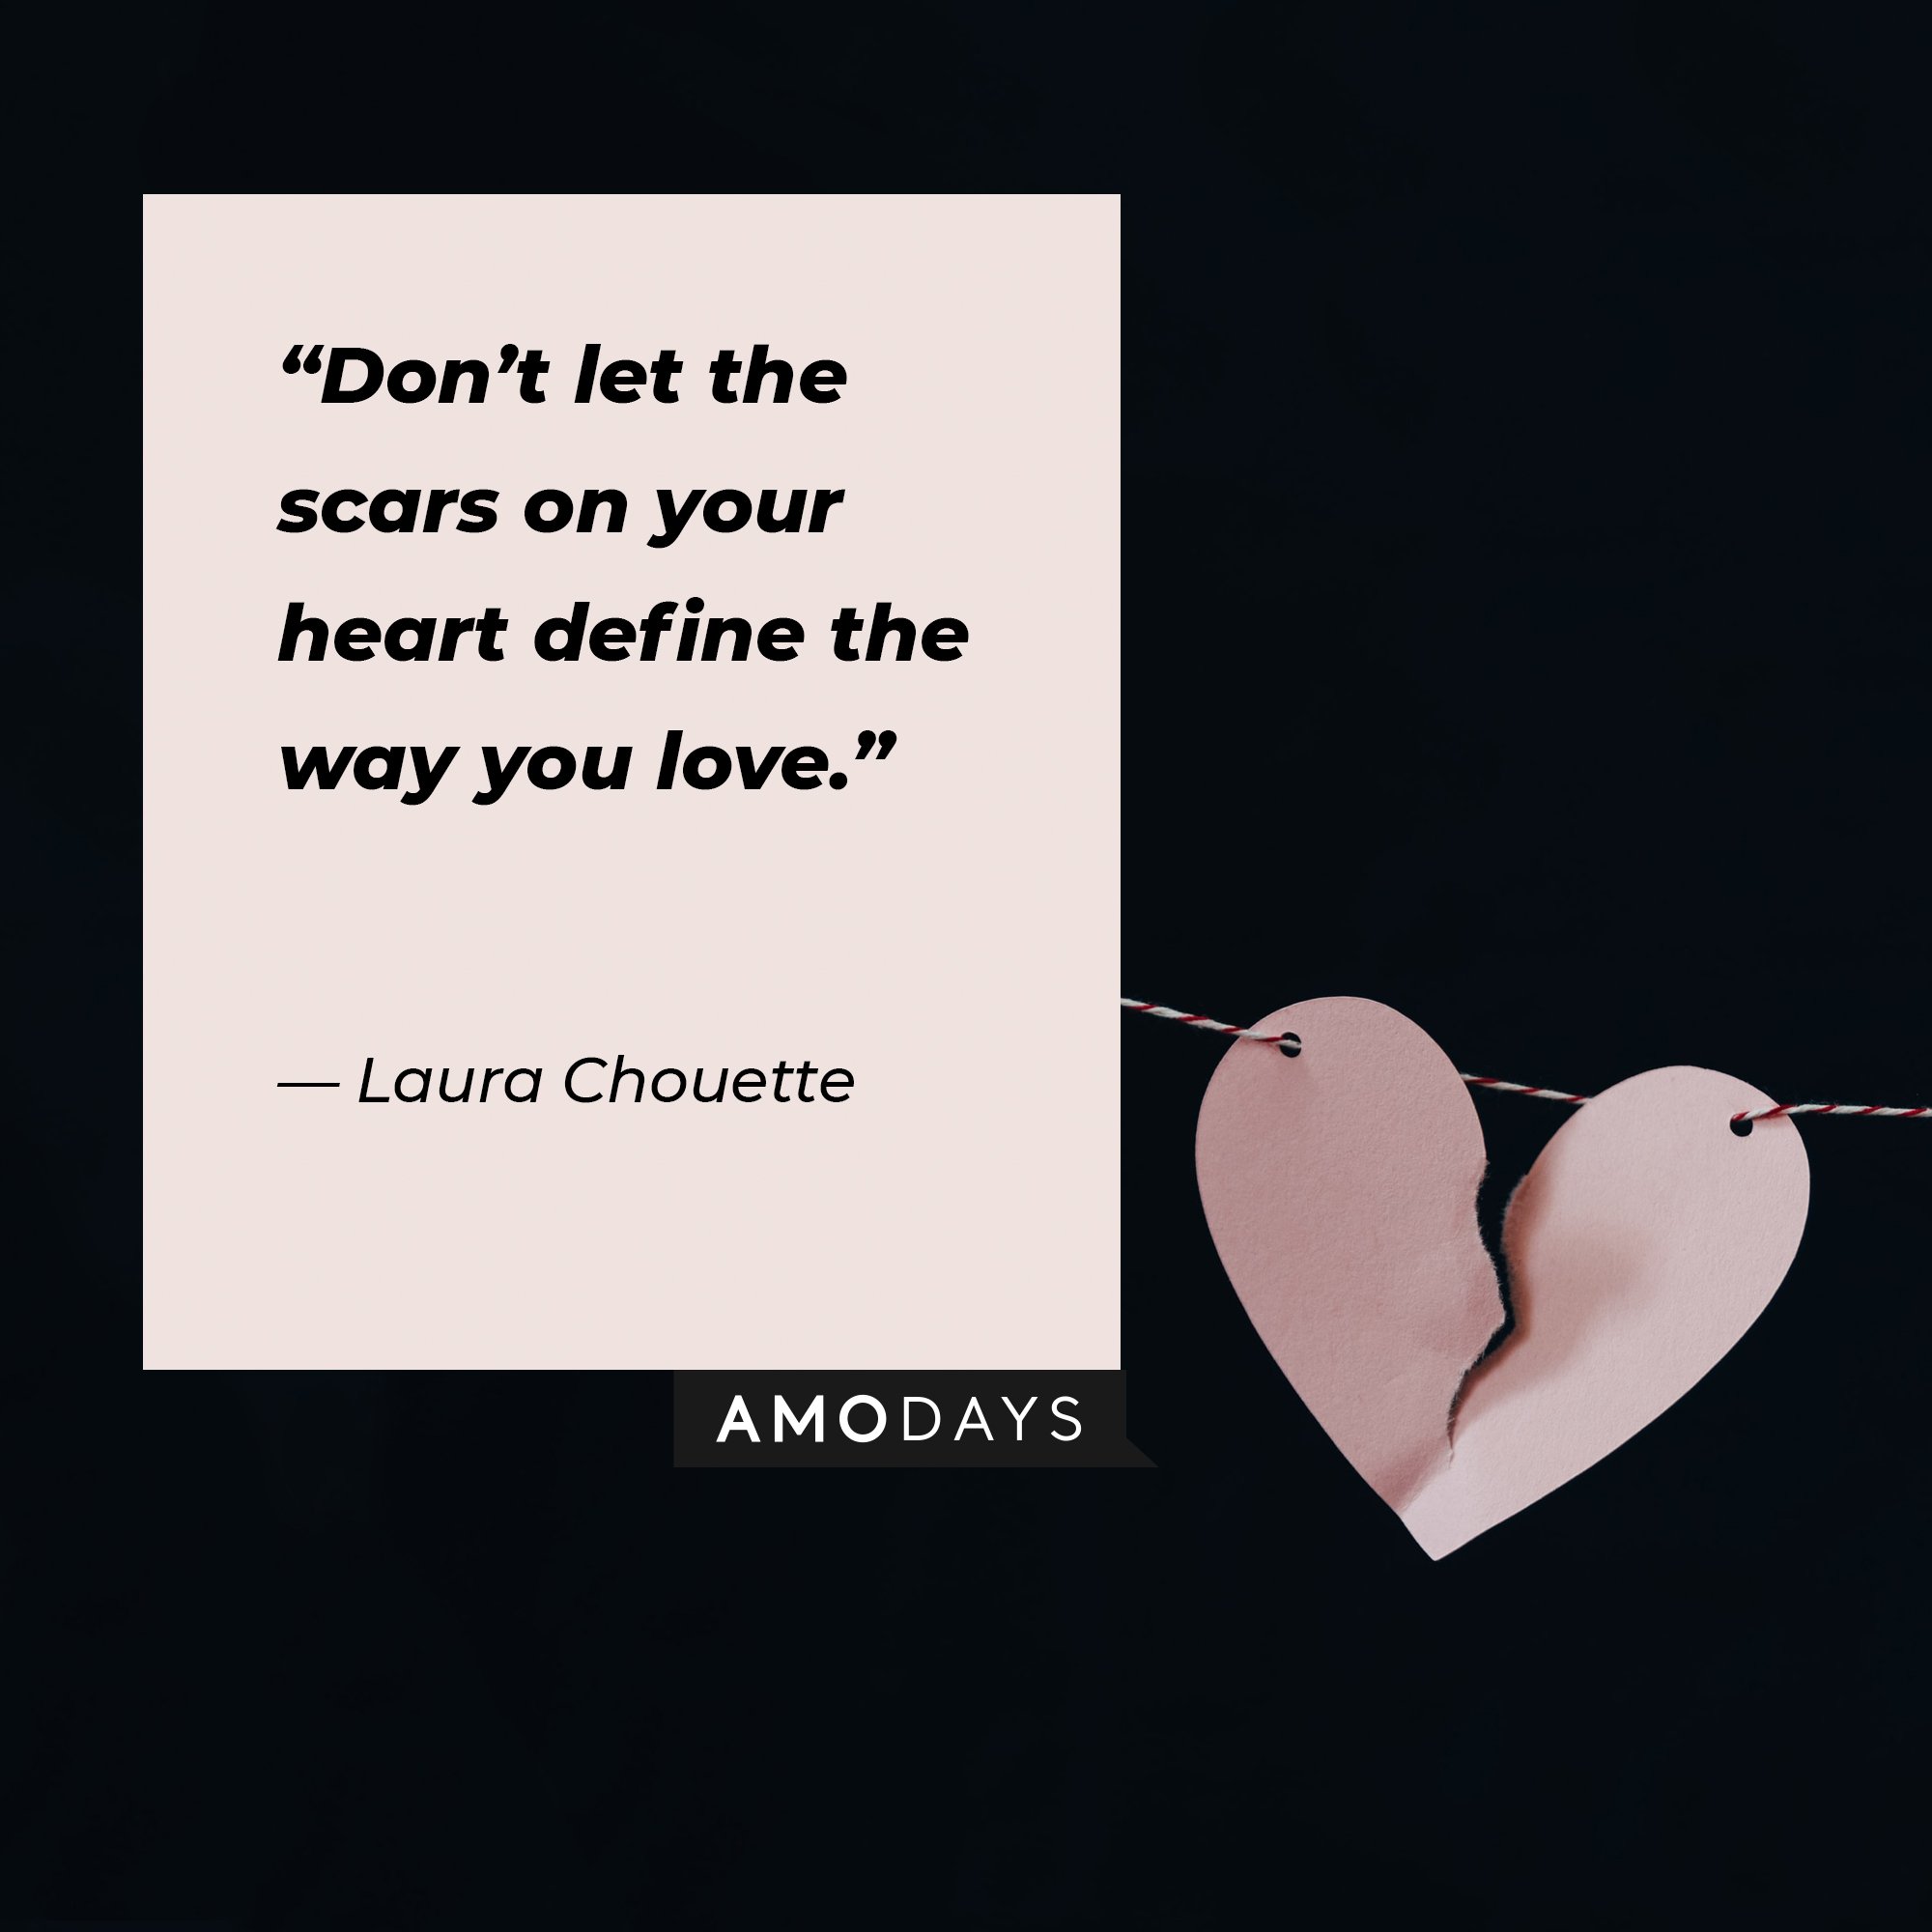 Laura Chouette’s quote: “Don’t let the scars on your heart define the way you love.” | Image: AmoDays